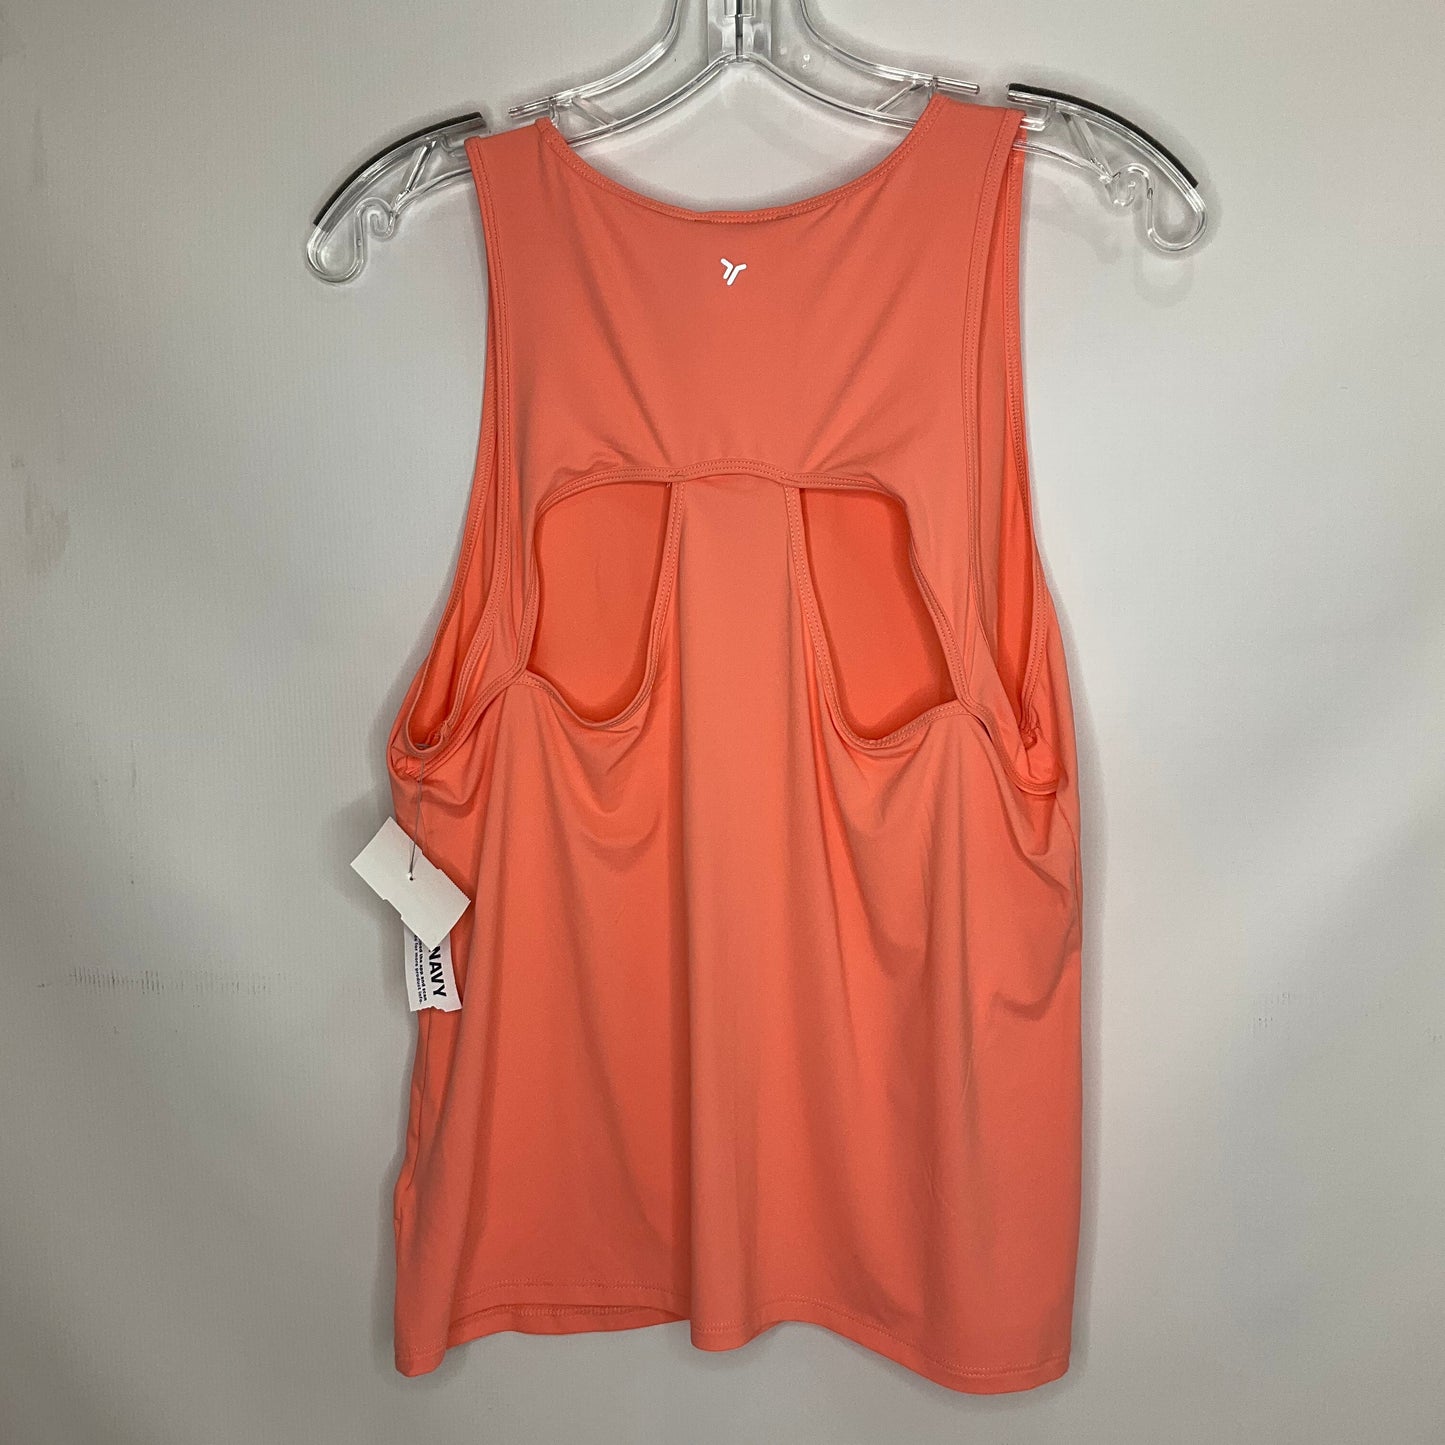 Peach Athletic Tank Top Old Navy, Size L